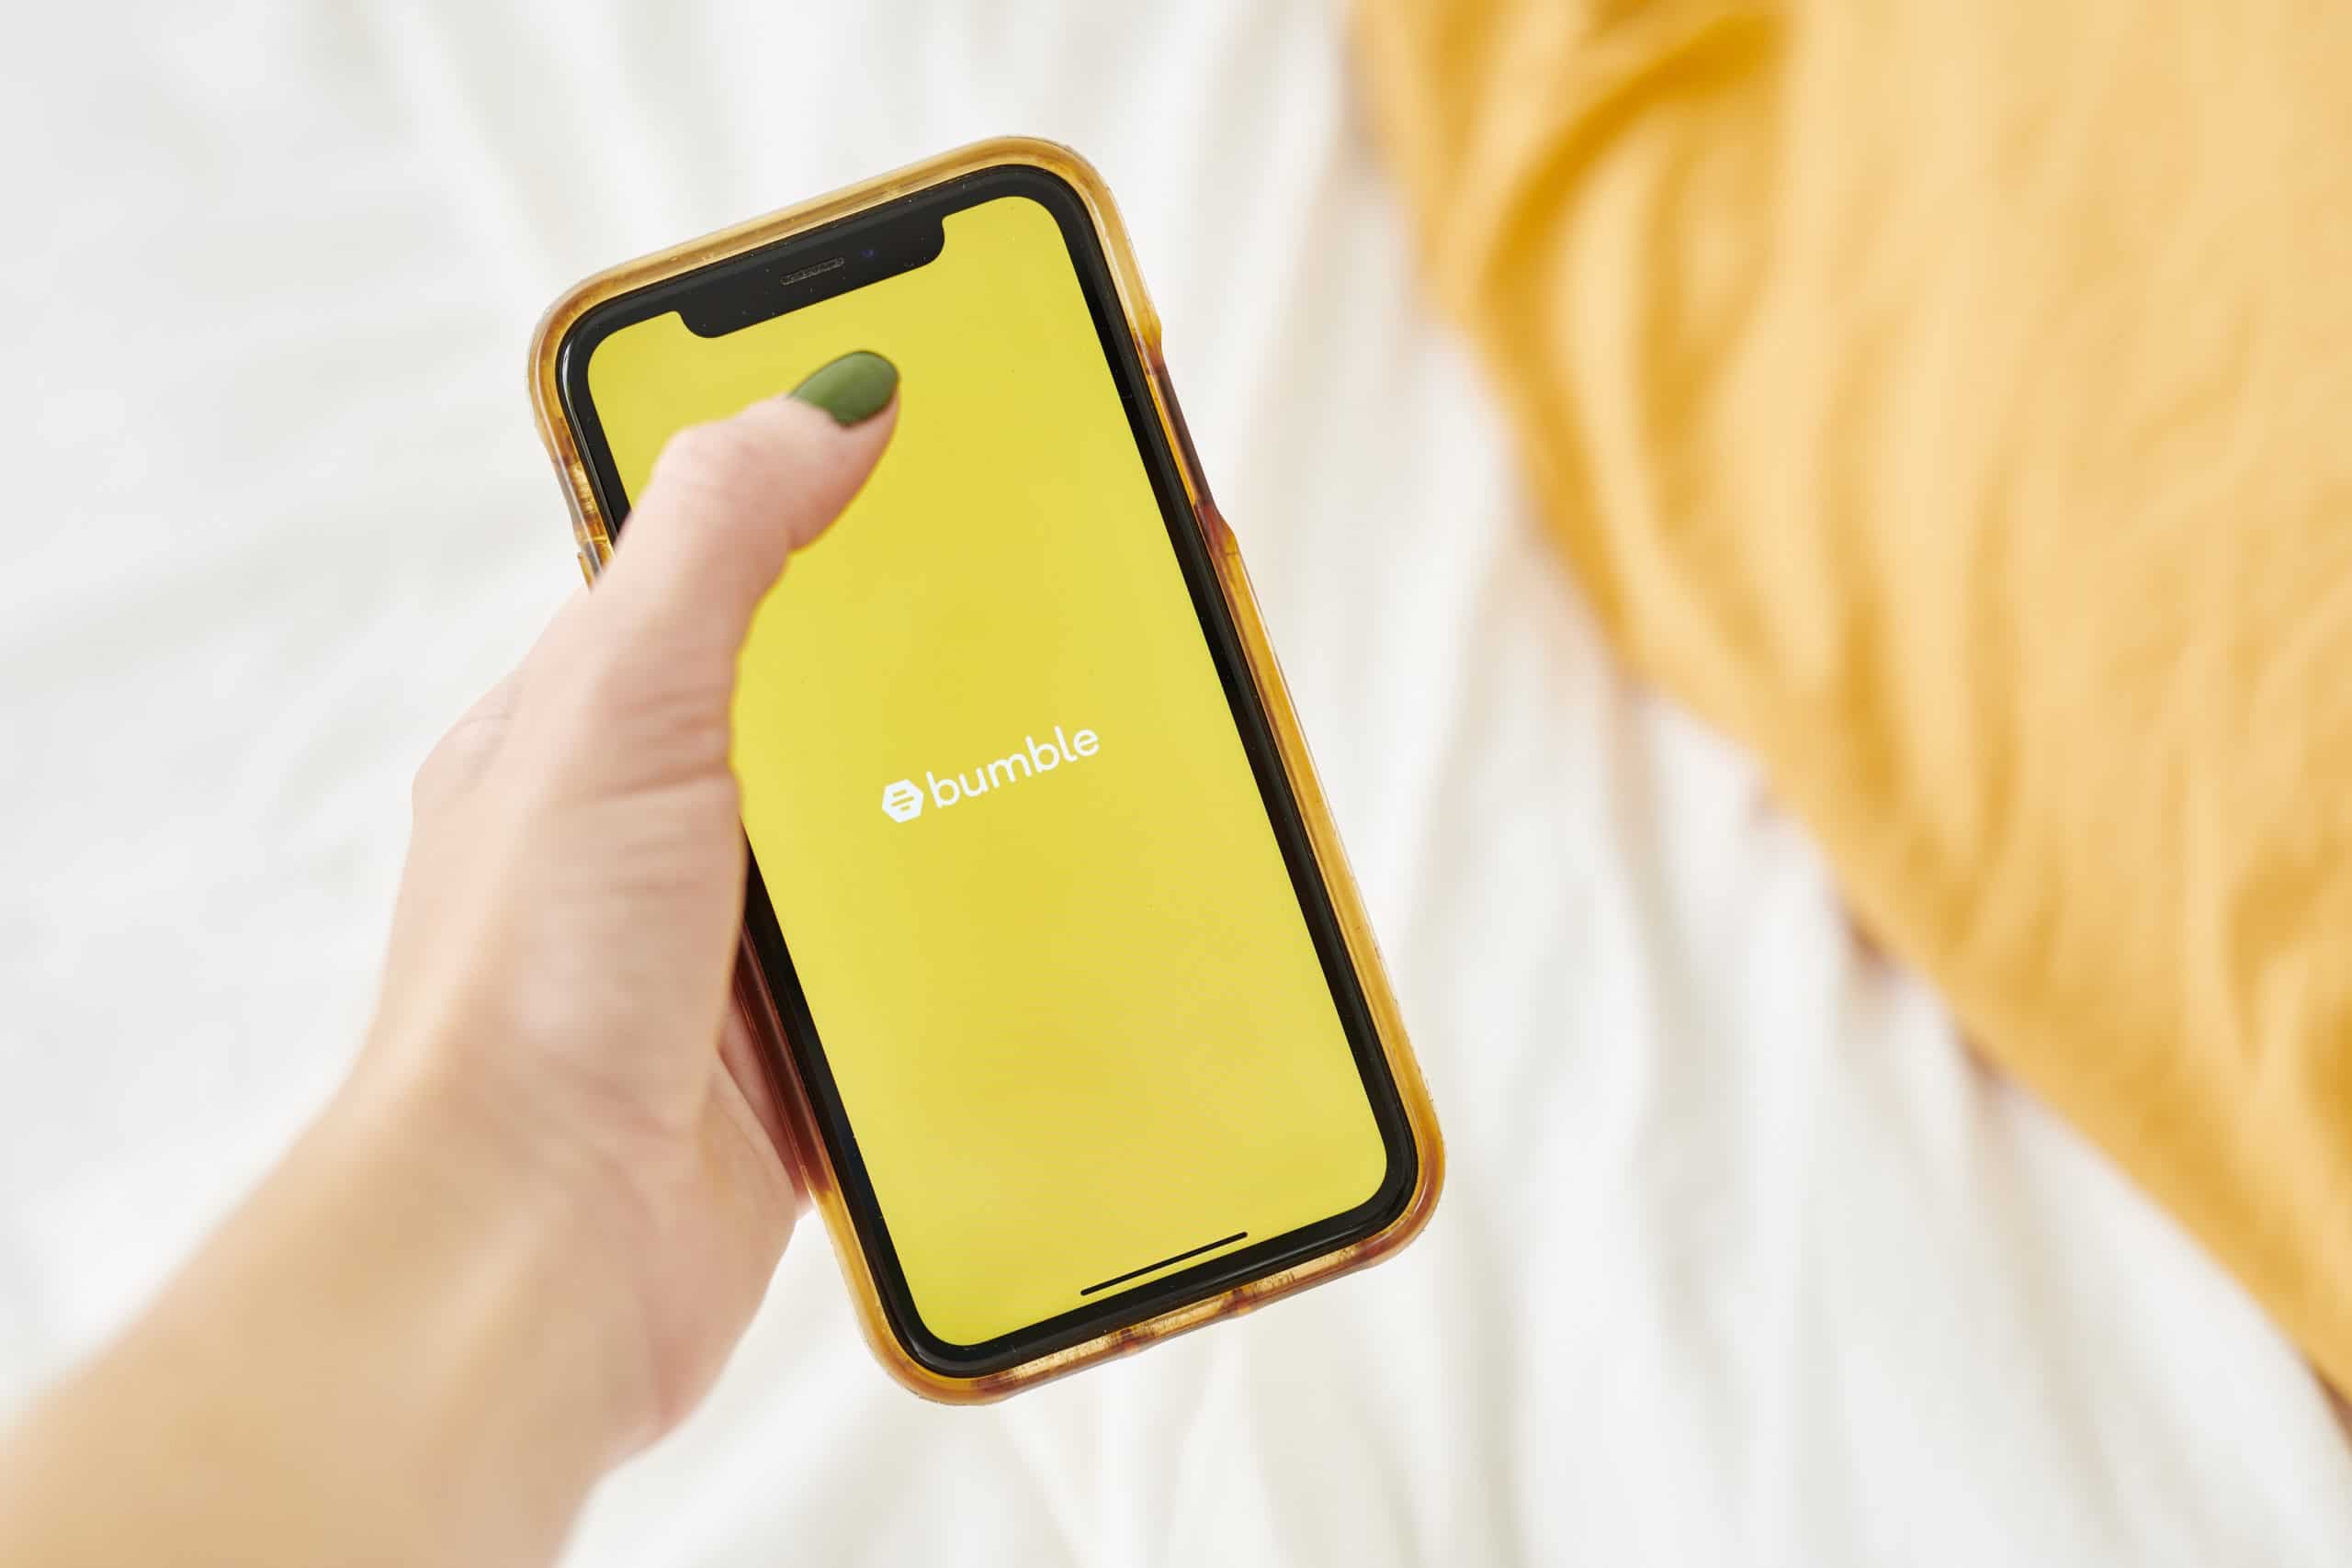 Blackstone Seeks Payout From Bumble Loan Amid Online Dating Boom